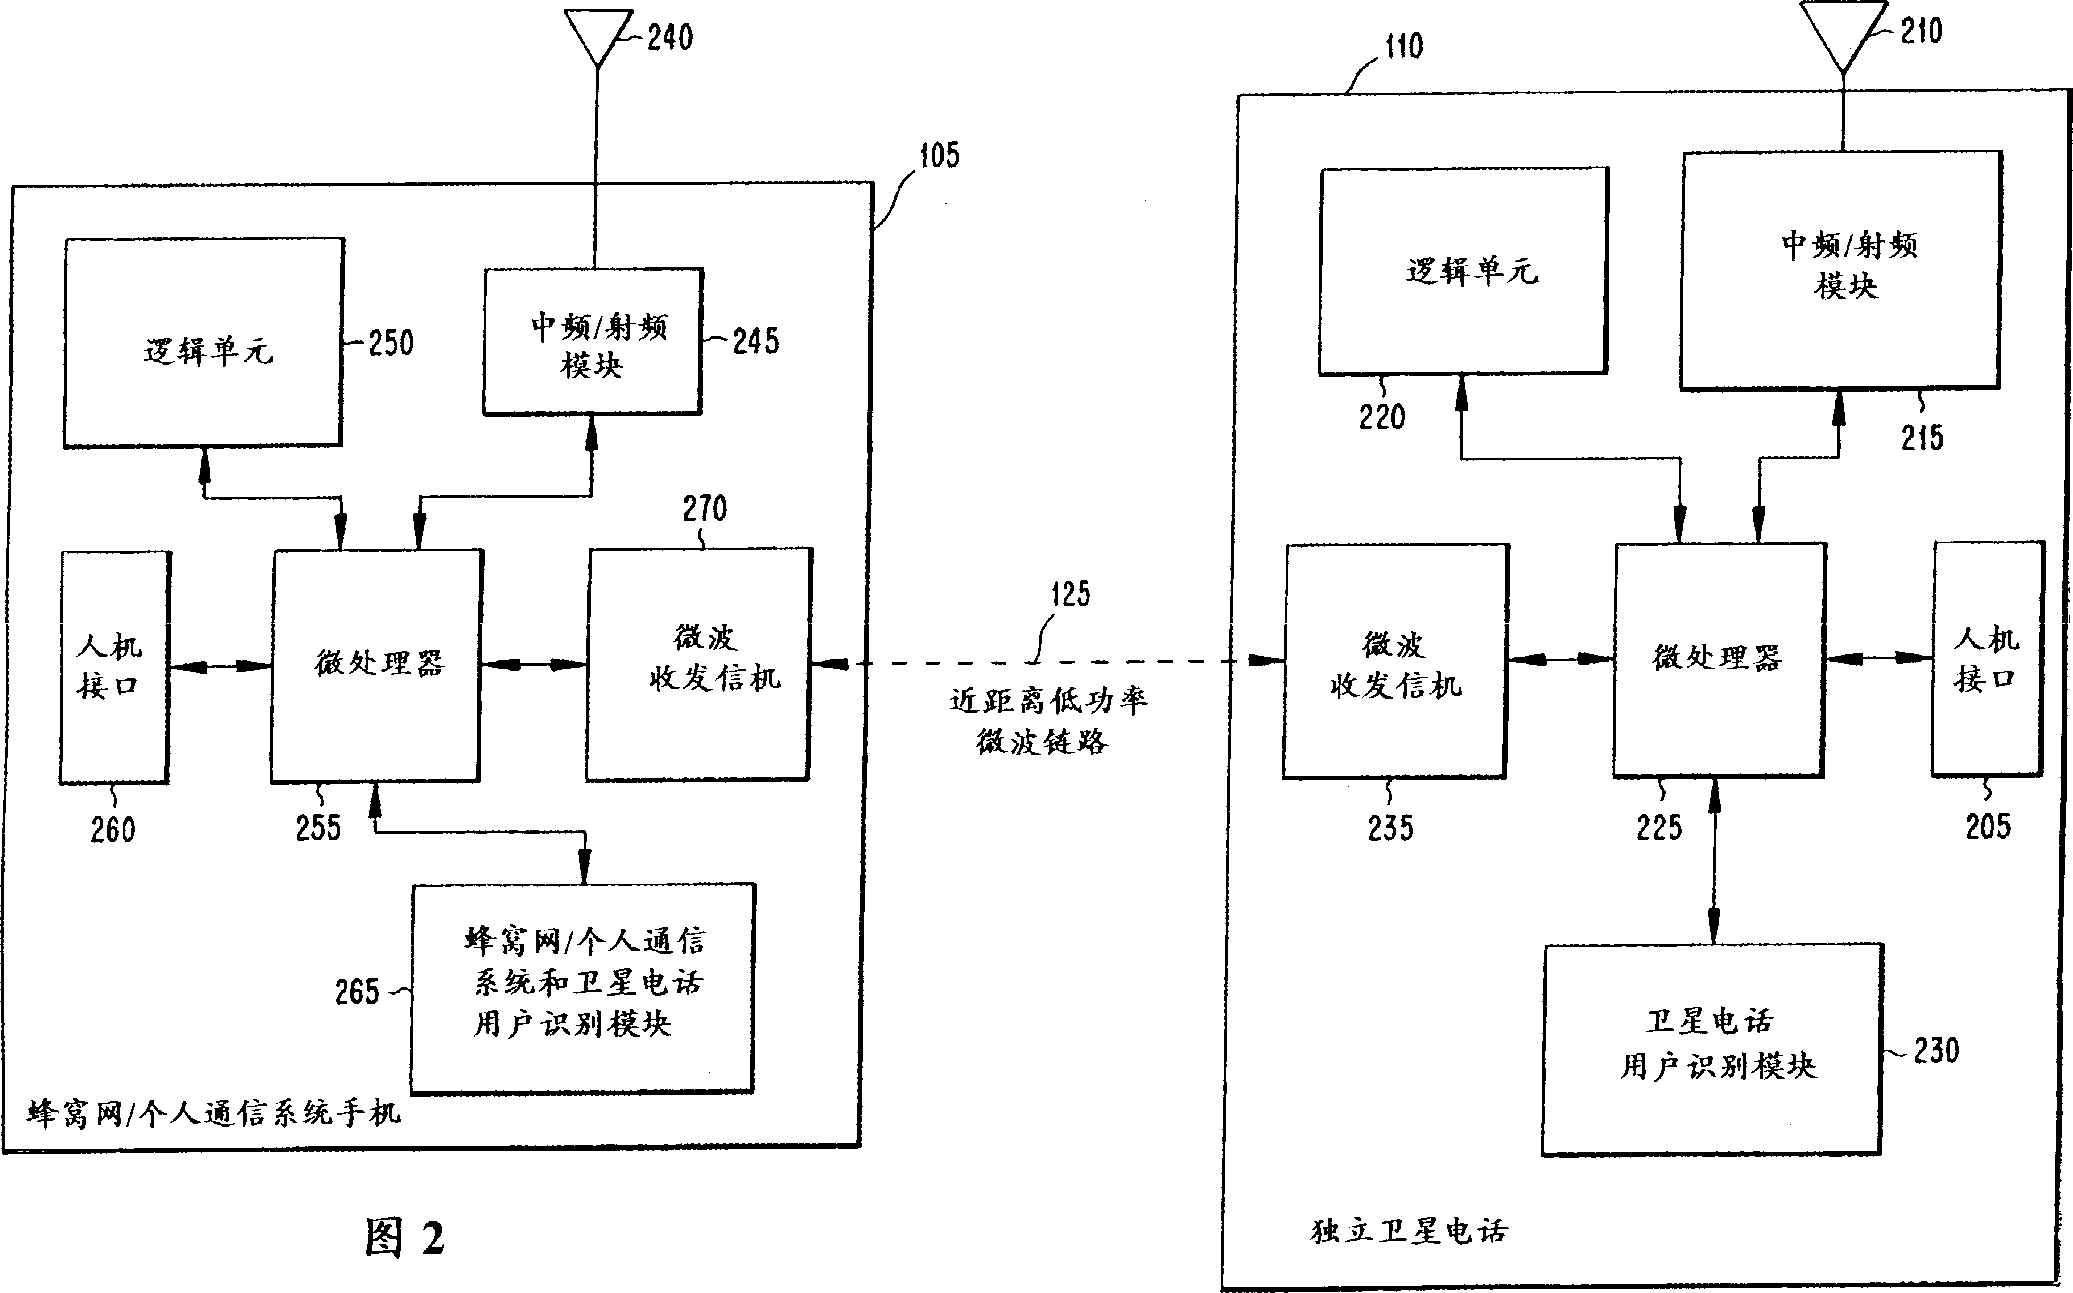 Dual-mode satellite/cellular phone architecture with physically separable modes